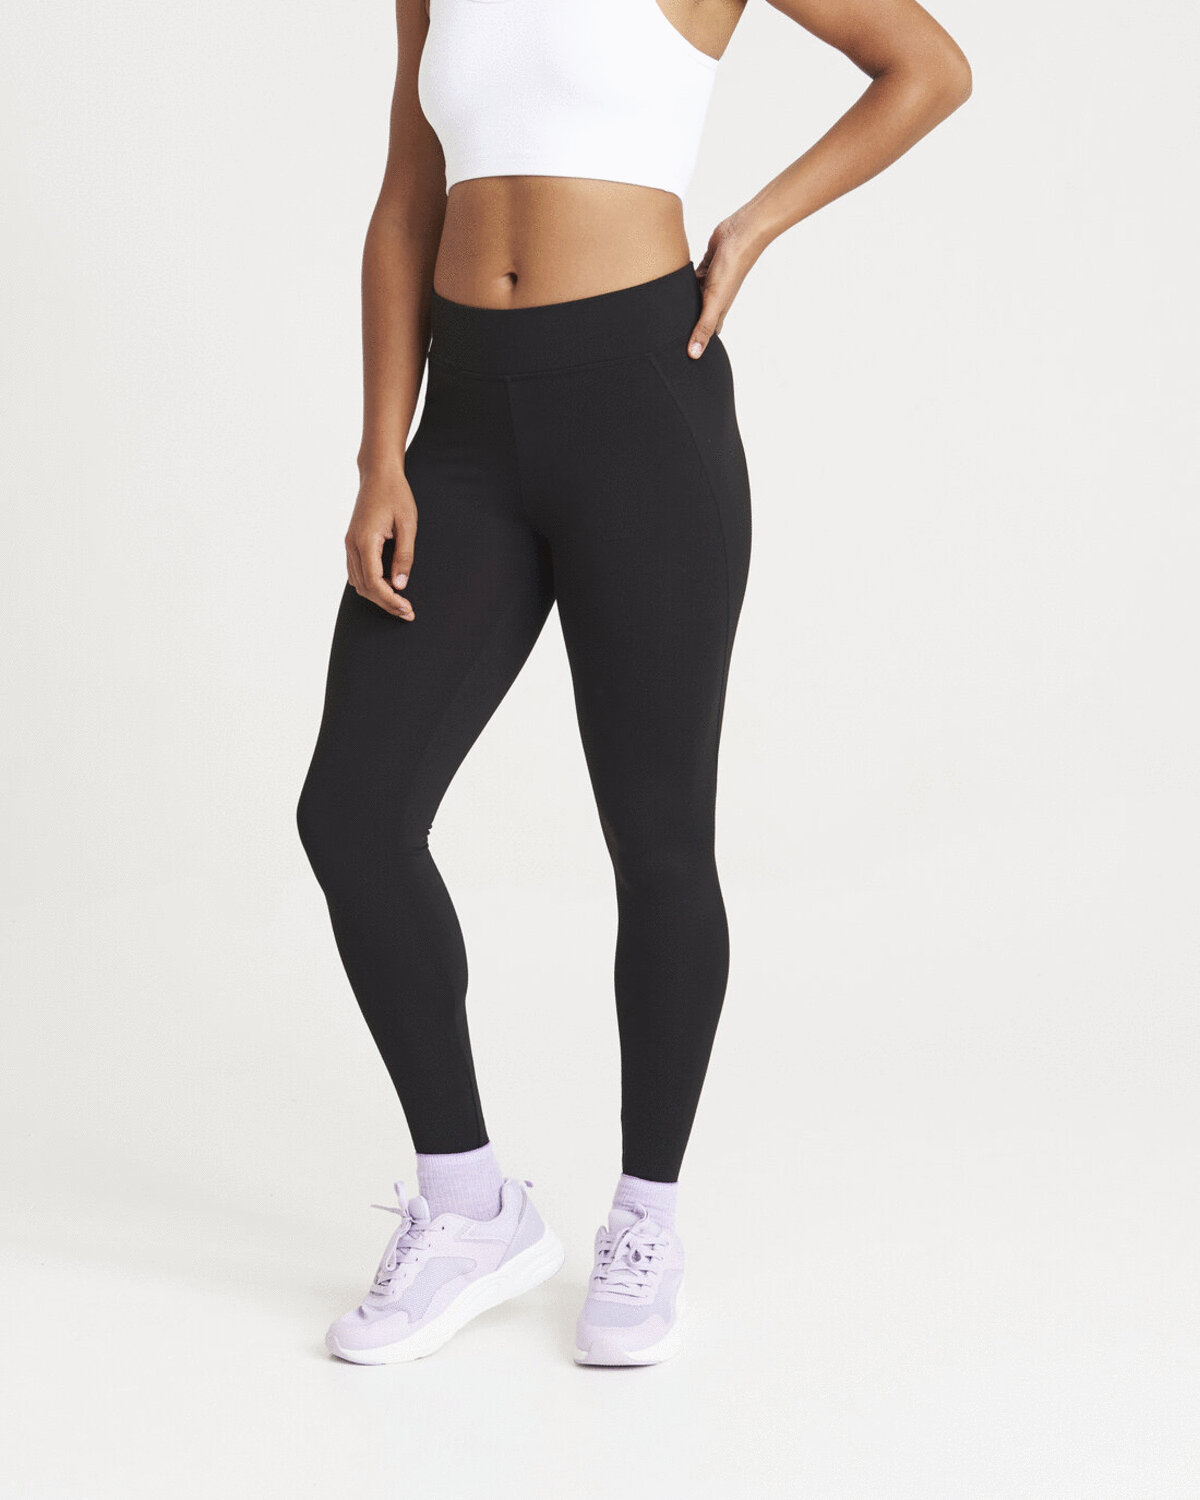 WOMENS COOL ATHLETIC PANTS